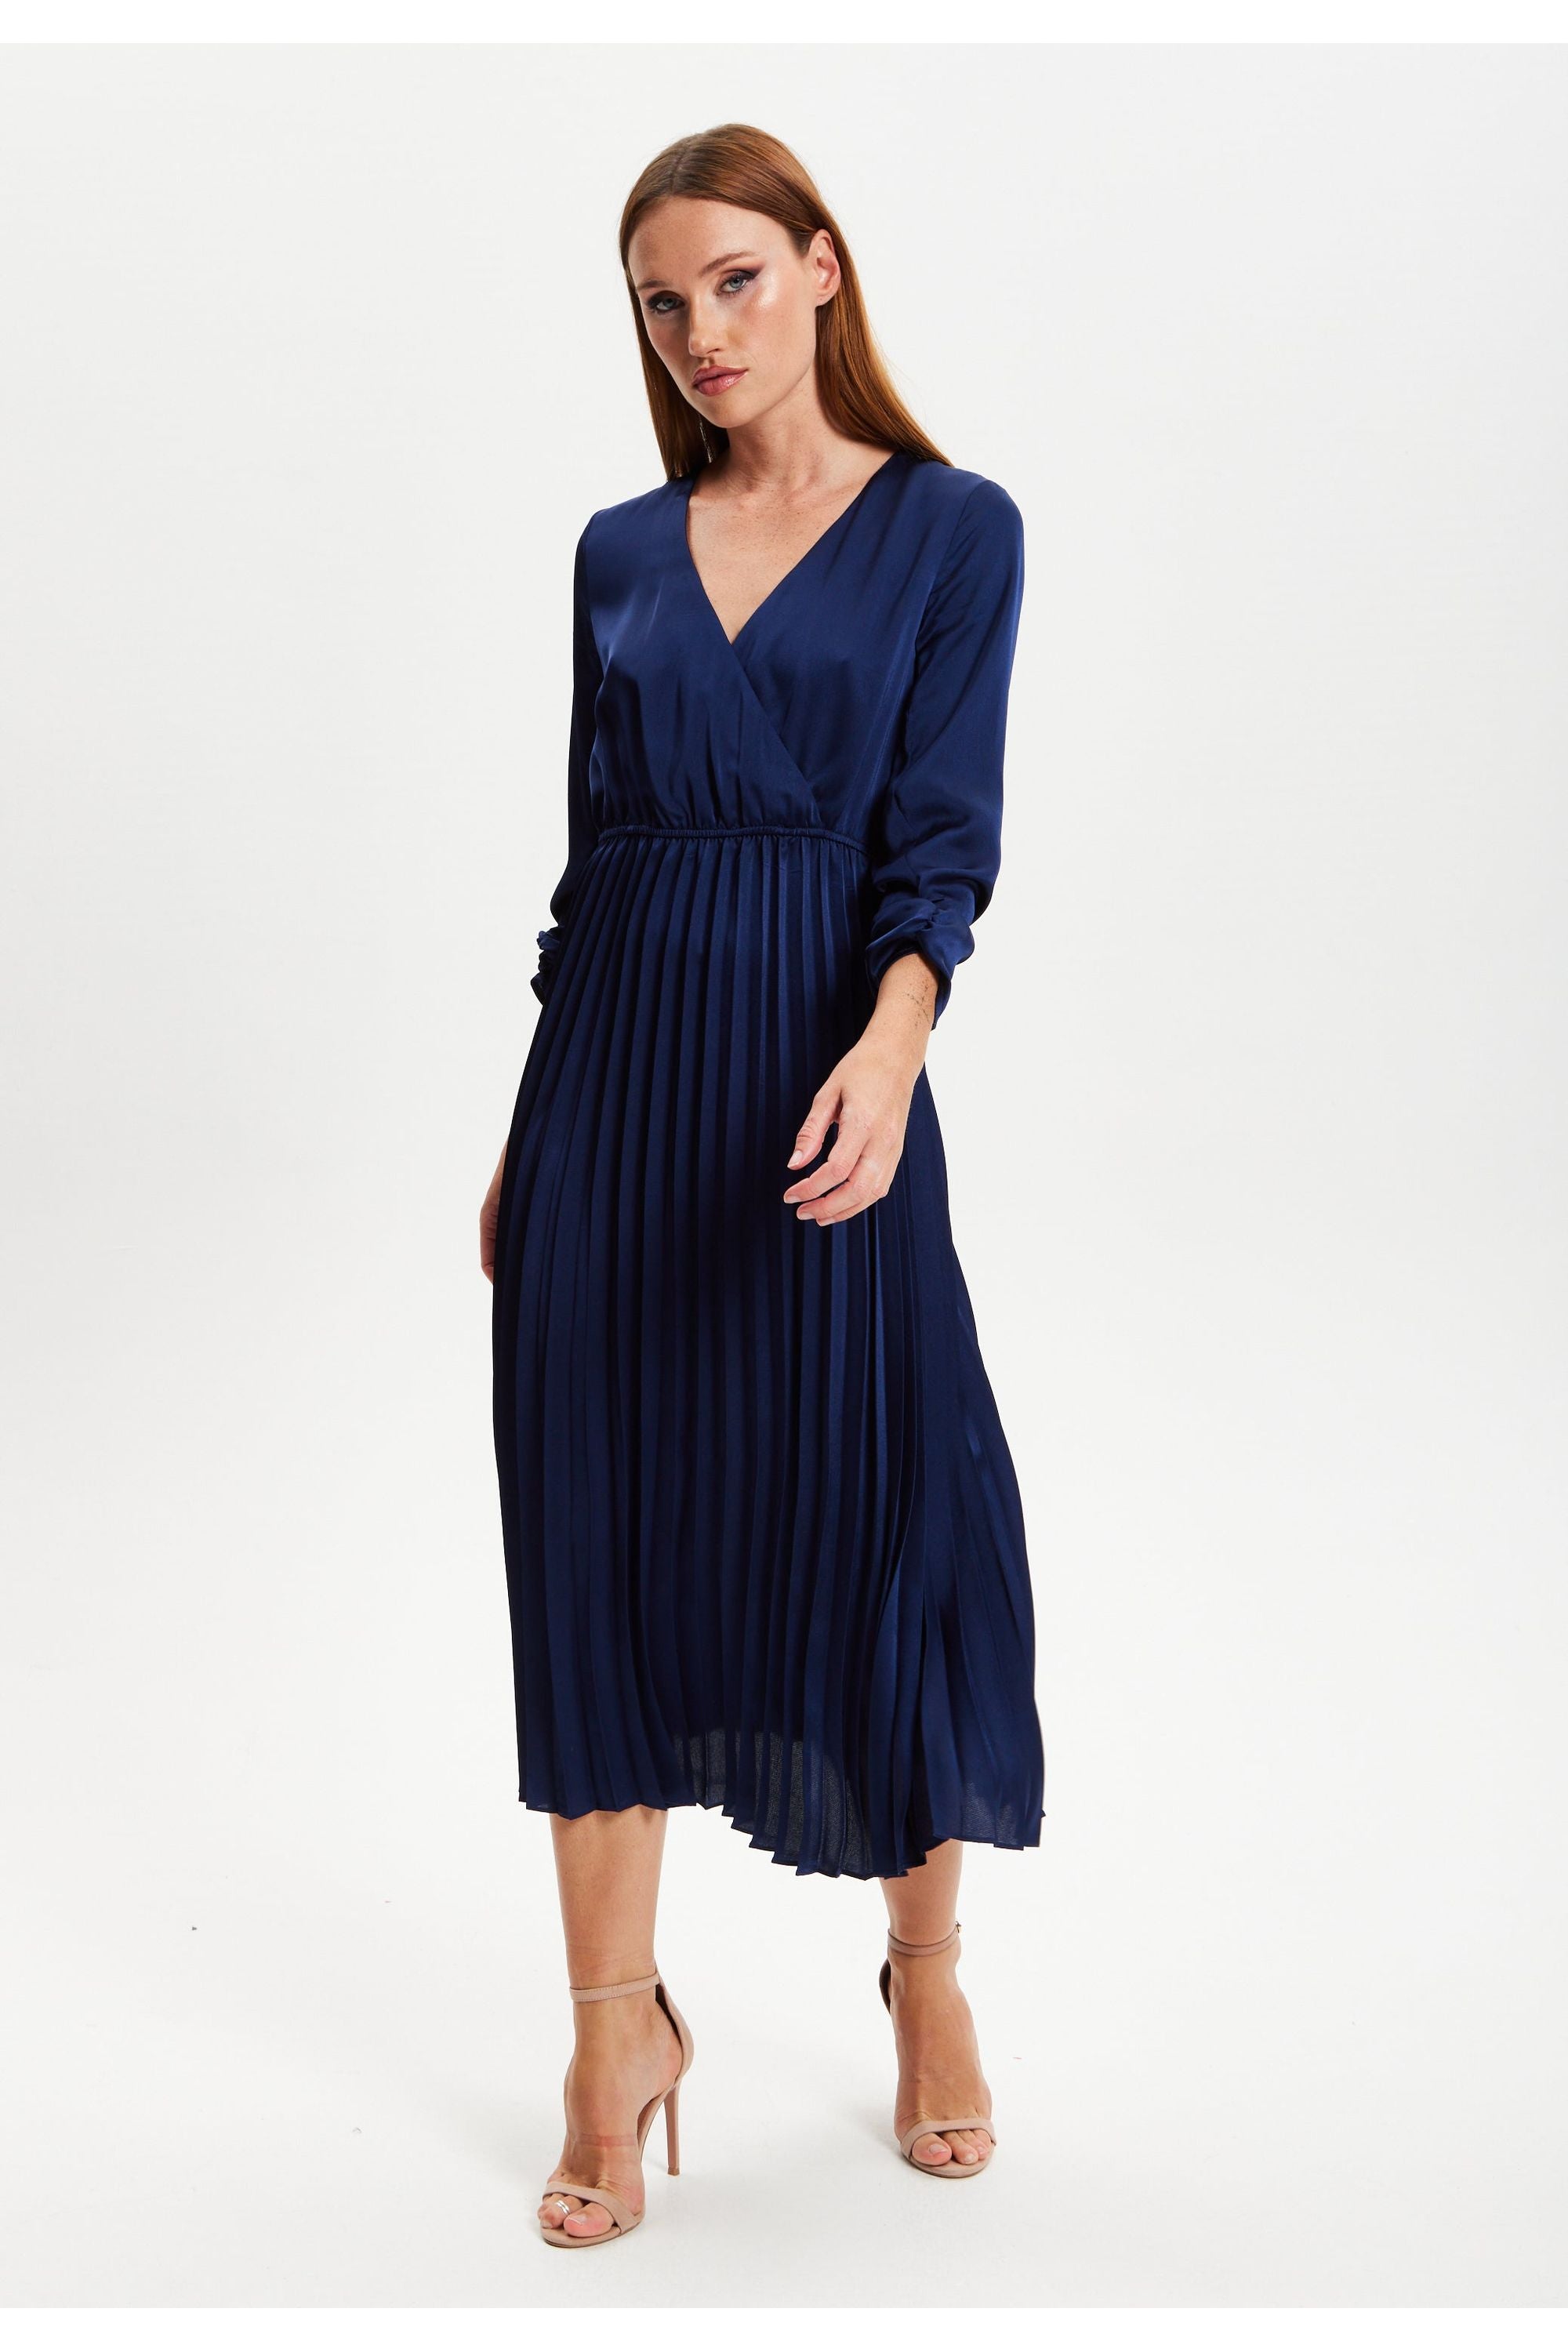 Navy Midi Dress With Pleat Details EH1908Navy